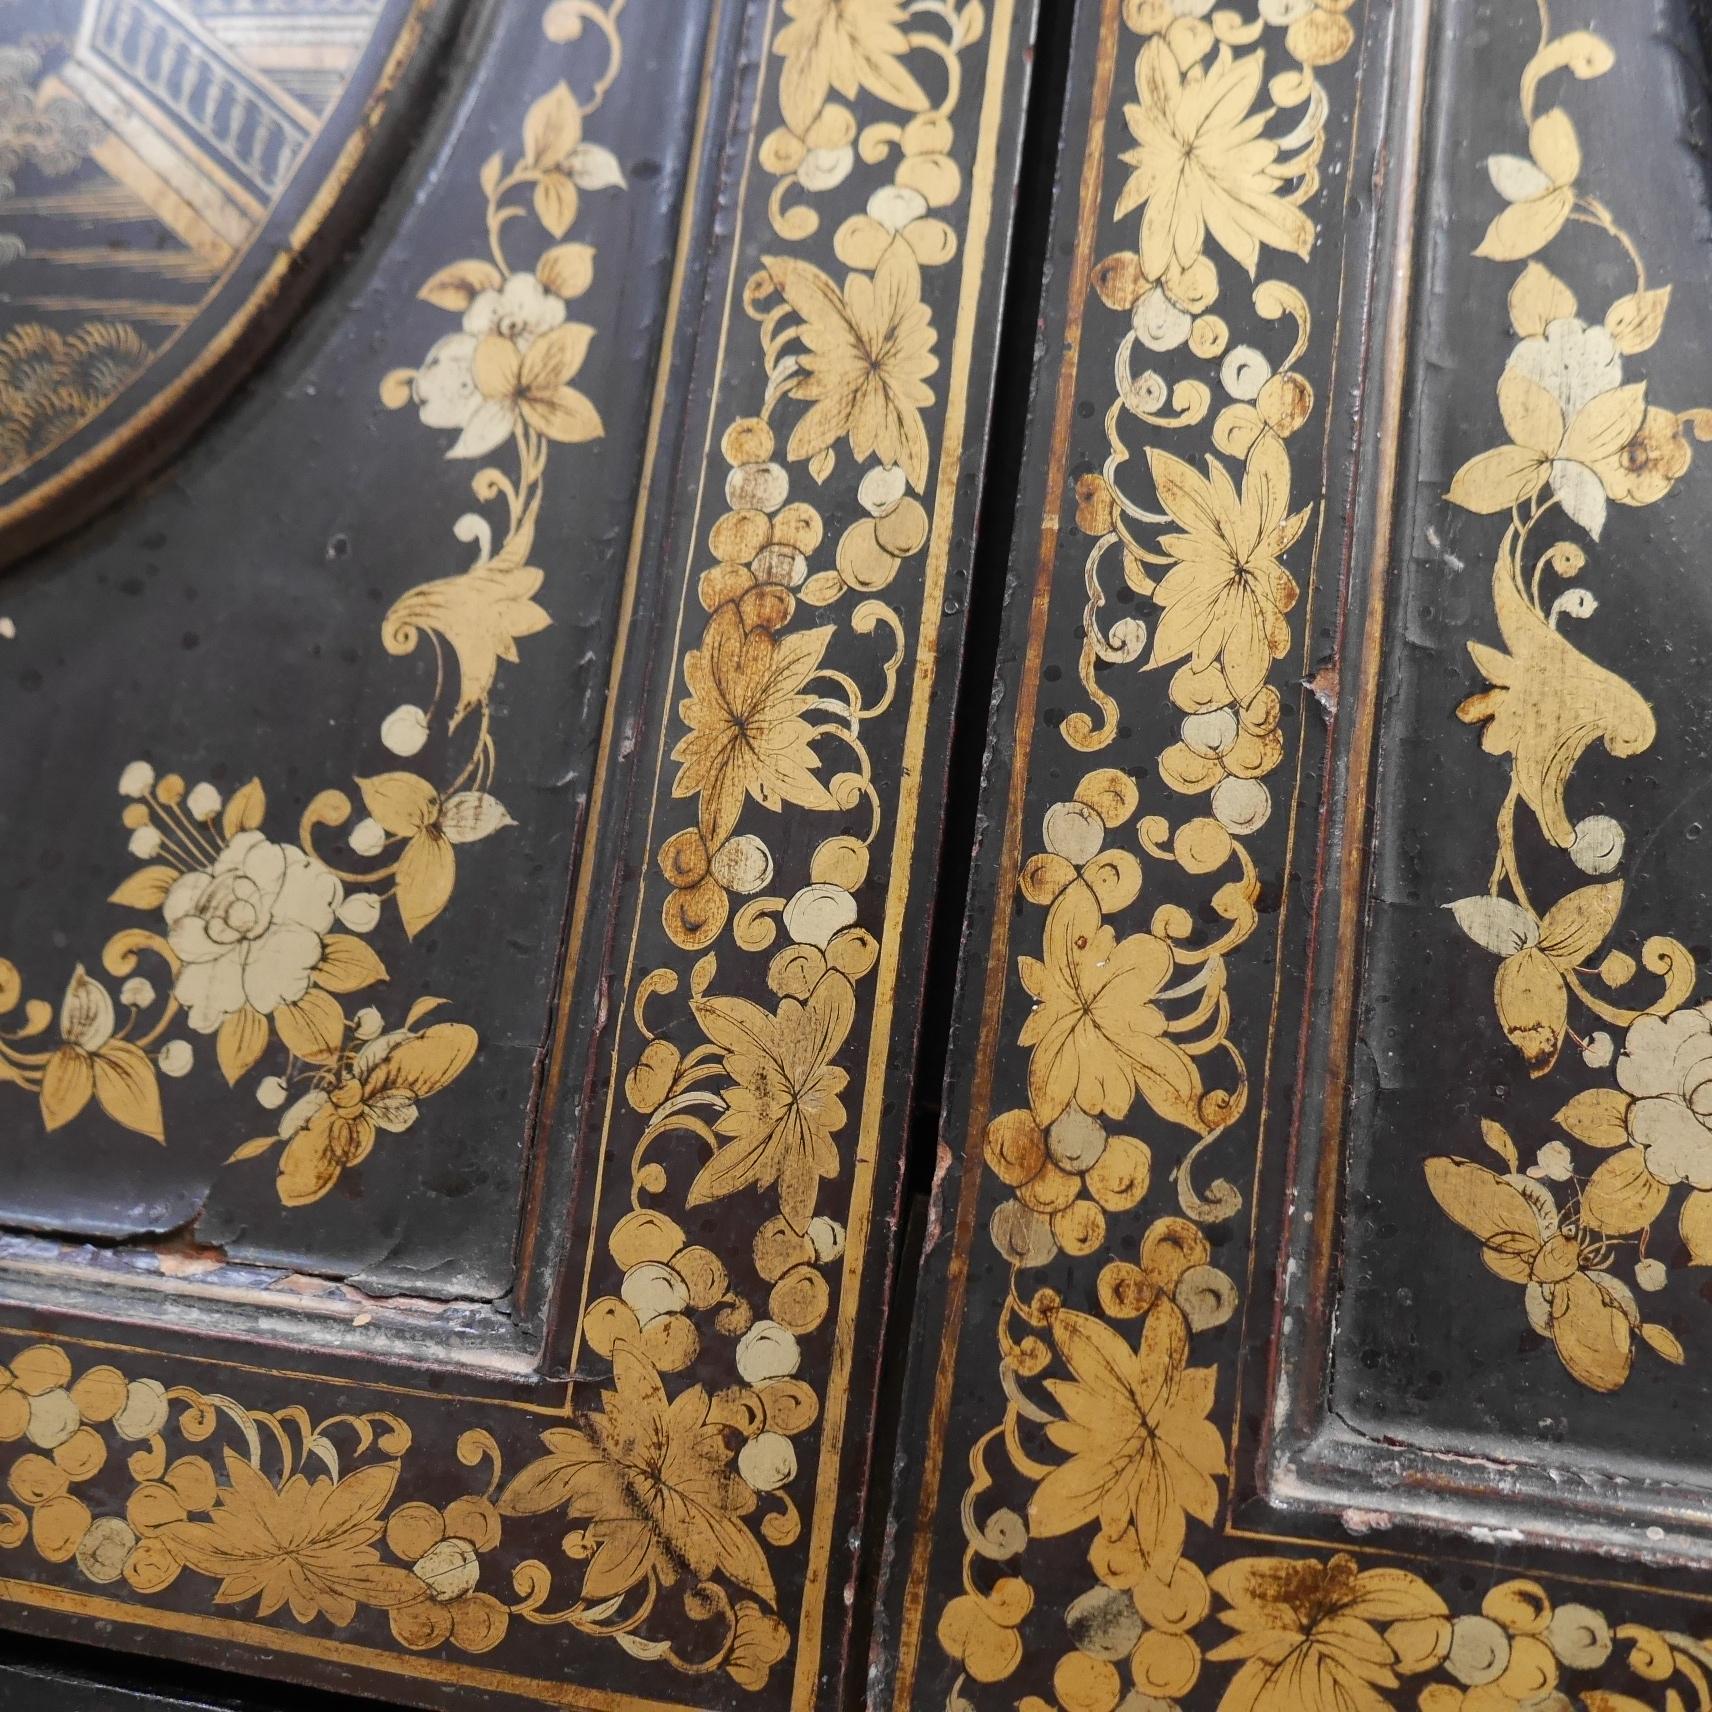 A Chinese export chinoiserie cabinet.
A wonderful chinoiserie table top cabinet in the most amazing & beautifully preserved, black lacquered & hand painted gilt detailing. The twin doors open to reveal a shelved black Japanned interior with two